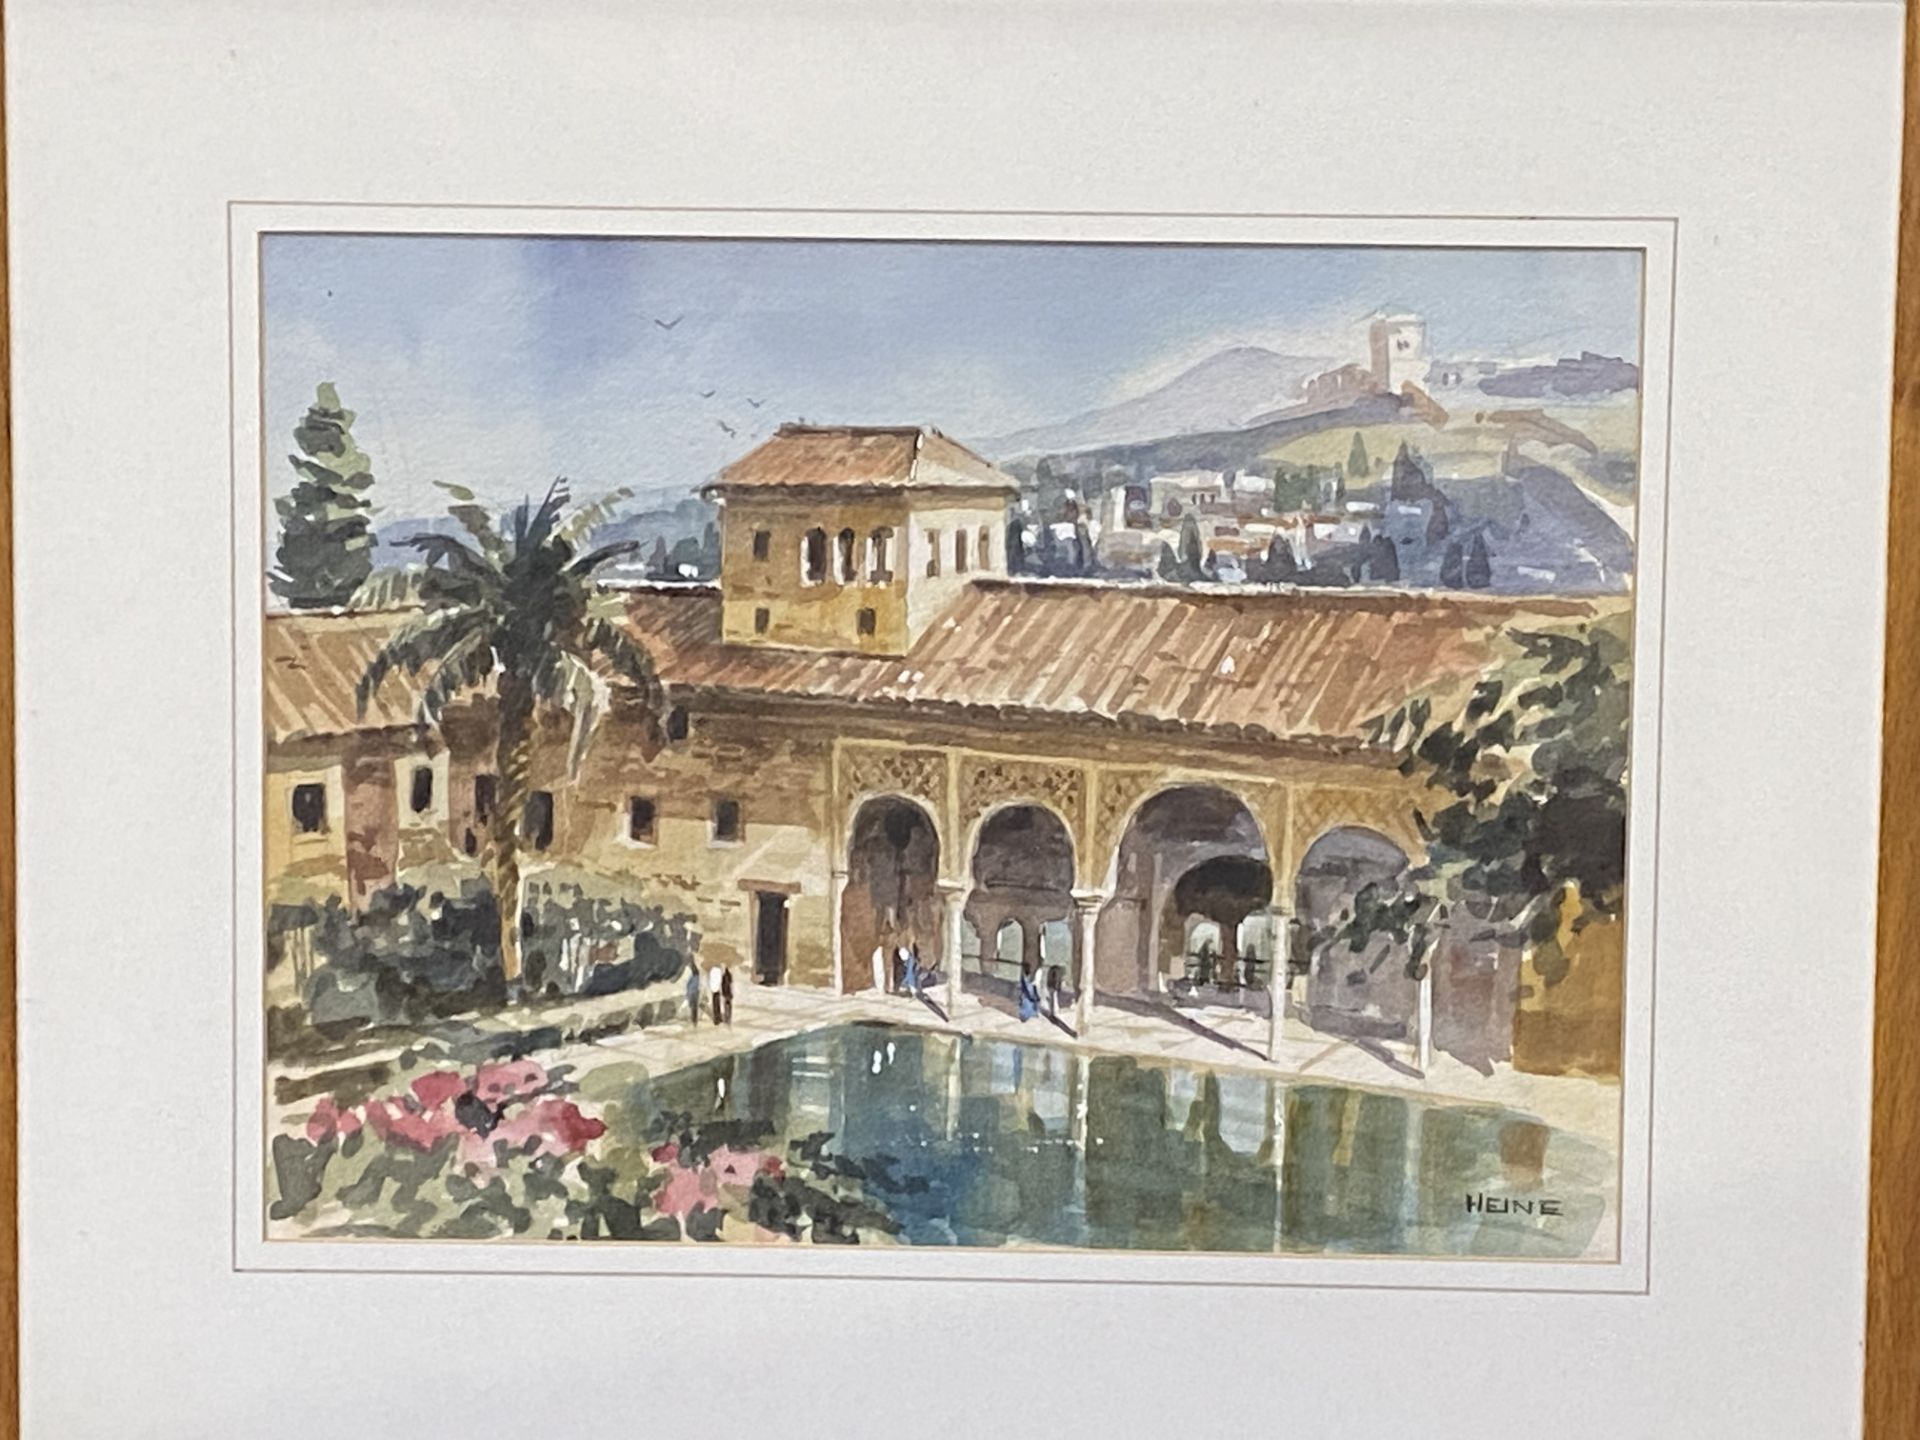 Framed and glazed watercolour of the Lady's Tower in Alhambra - Bild 2 aus 3